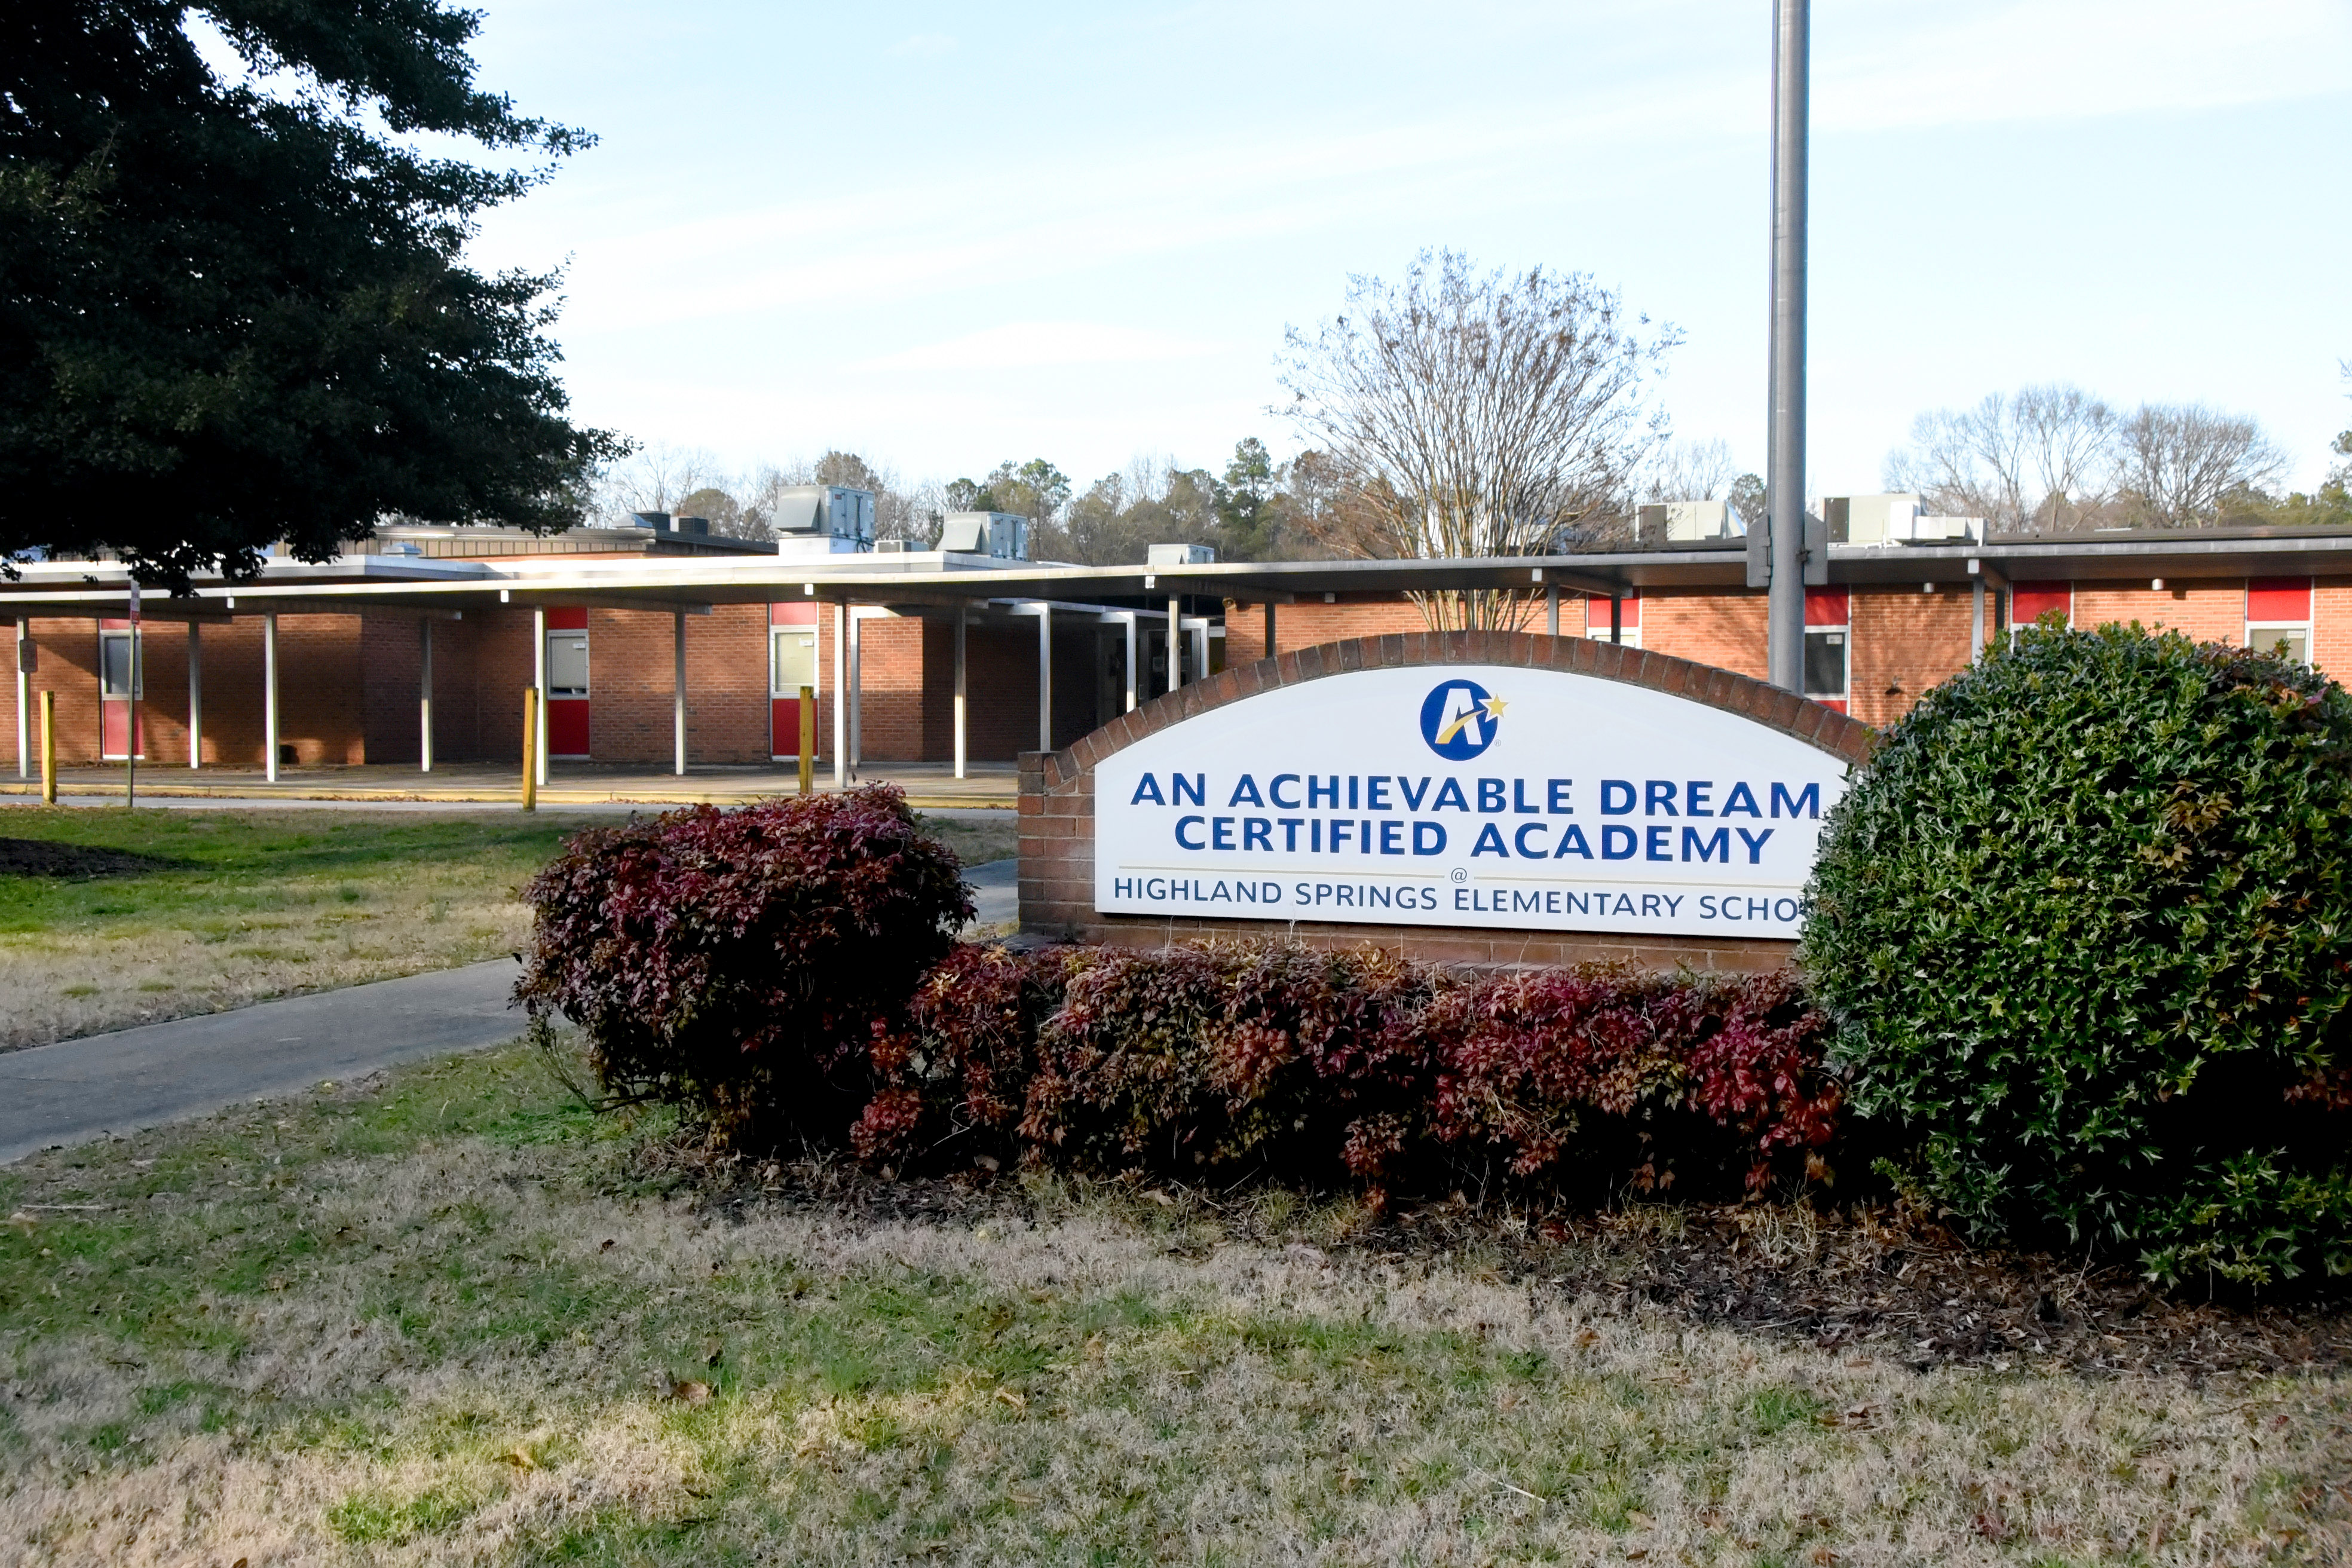 front sign reading: an achievable dream certified academy at highland springs elementary school surrounded by bushes